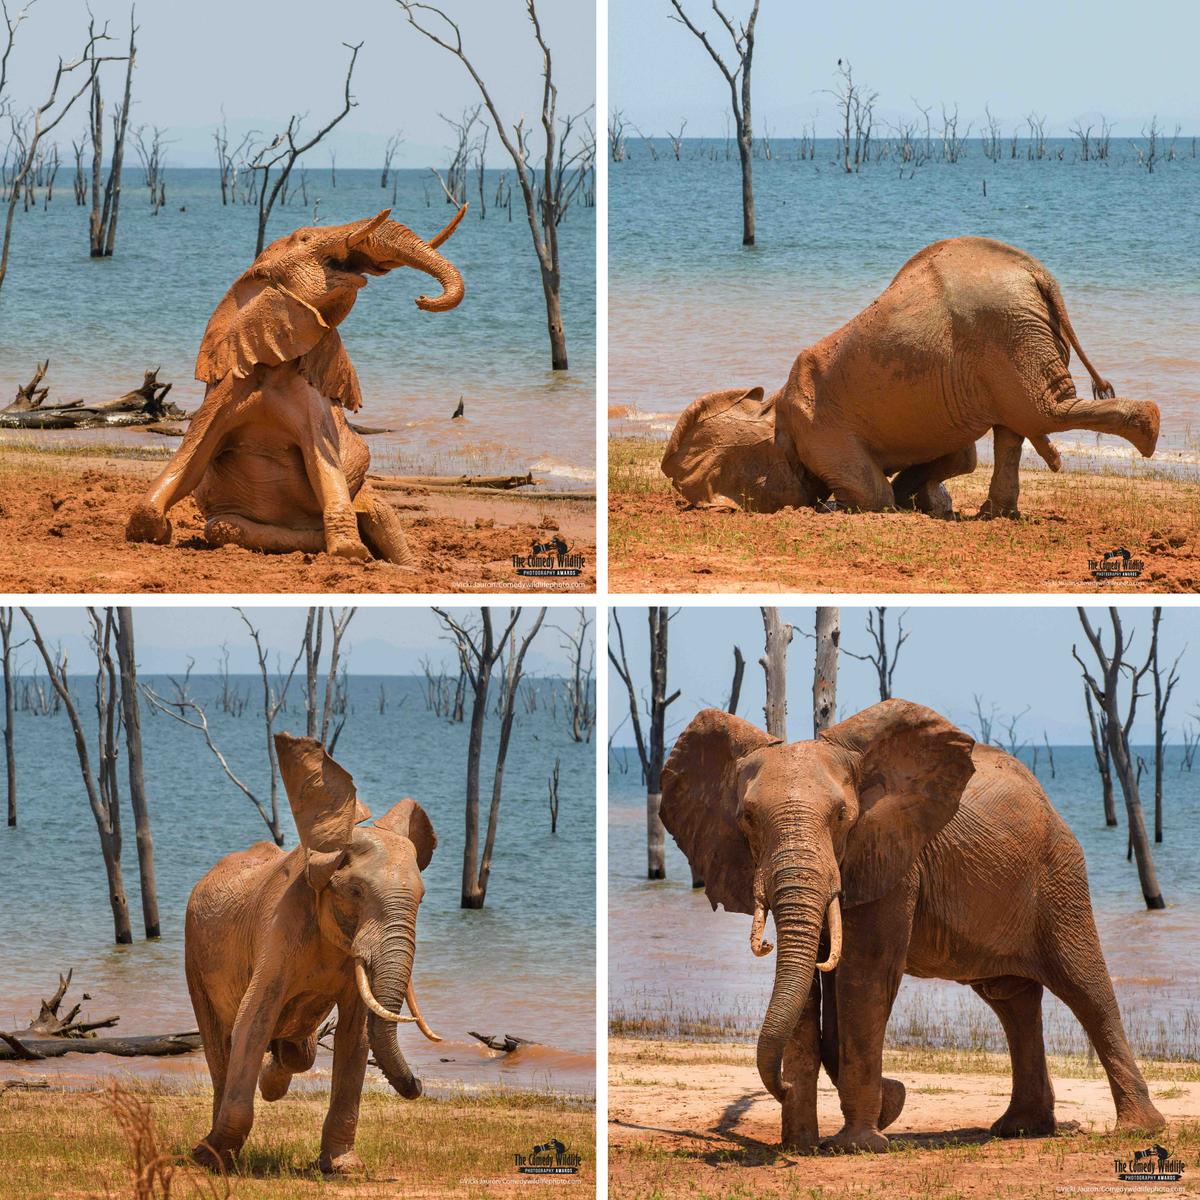 "The Joy of a Mud Bath" by Vicki Jauron. “An elephant expresses his joy in taking a mud bath against the dead trees on the shores of Lake Kariba in Zimbabwe on a hot afternoon.” (Courtesy of Vicki Jauron/<a href="https://www.facebook.com/comedywildlifephotoawards">Comedy Wildlife PhotographyAwards 2021</a>)